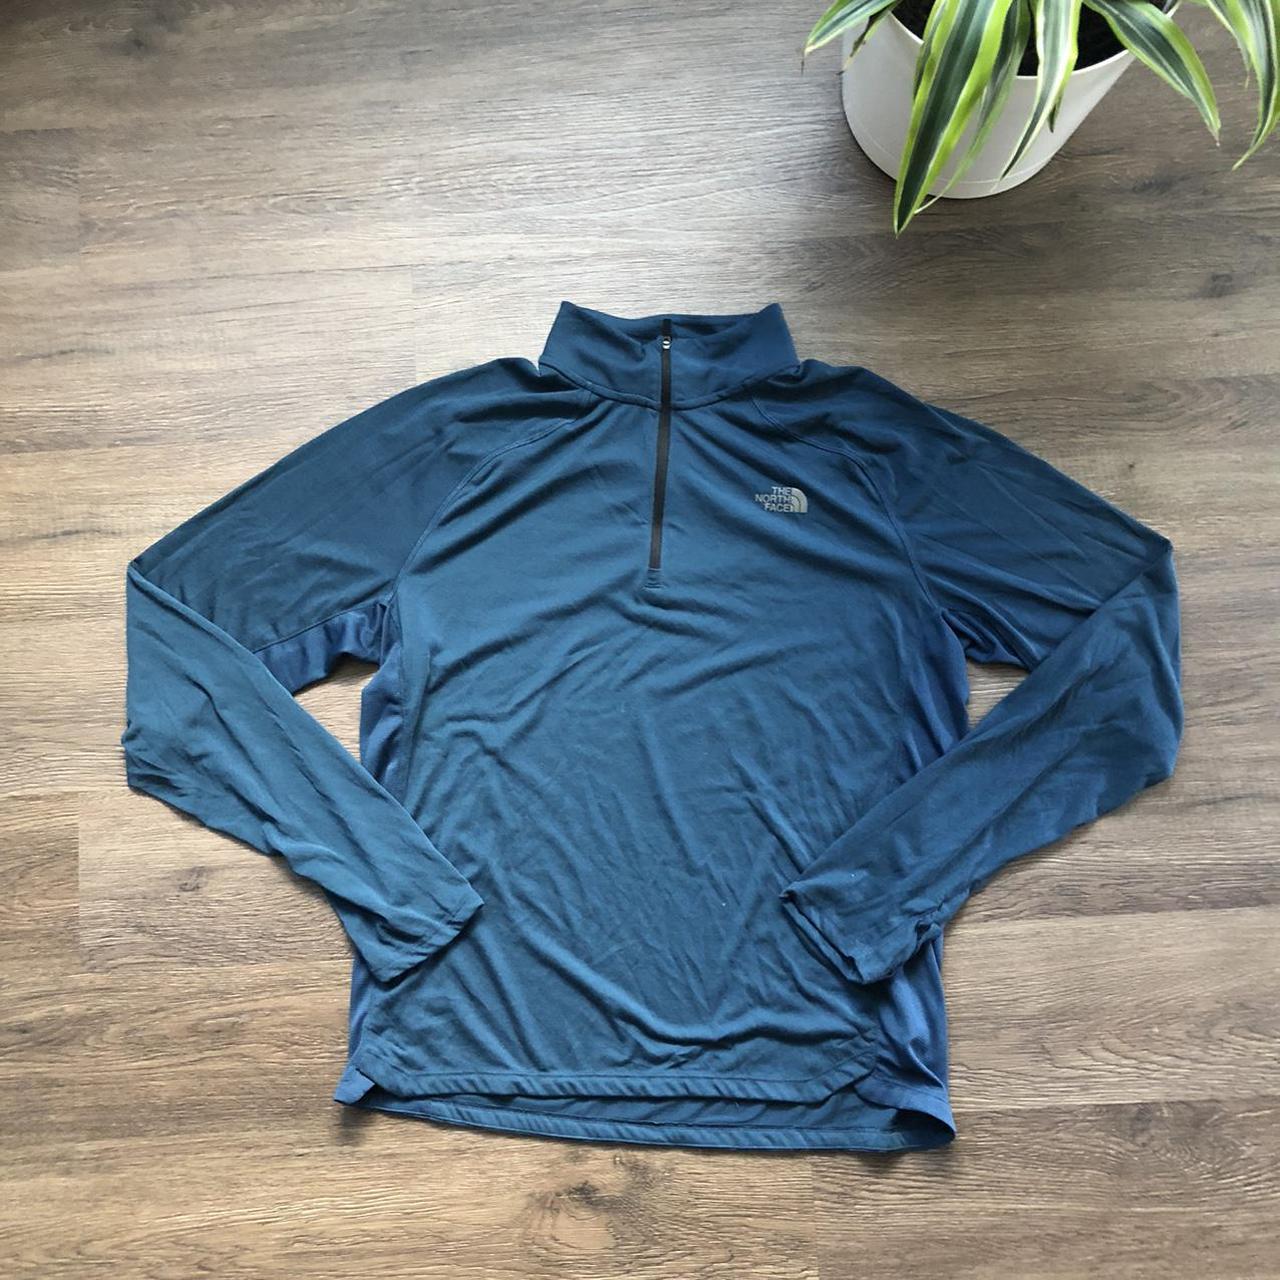 Product Image 1 - 🔥🏃THE NORTH FACE LONGSLEEVE🏃🔥
-Blue north